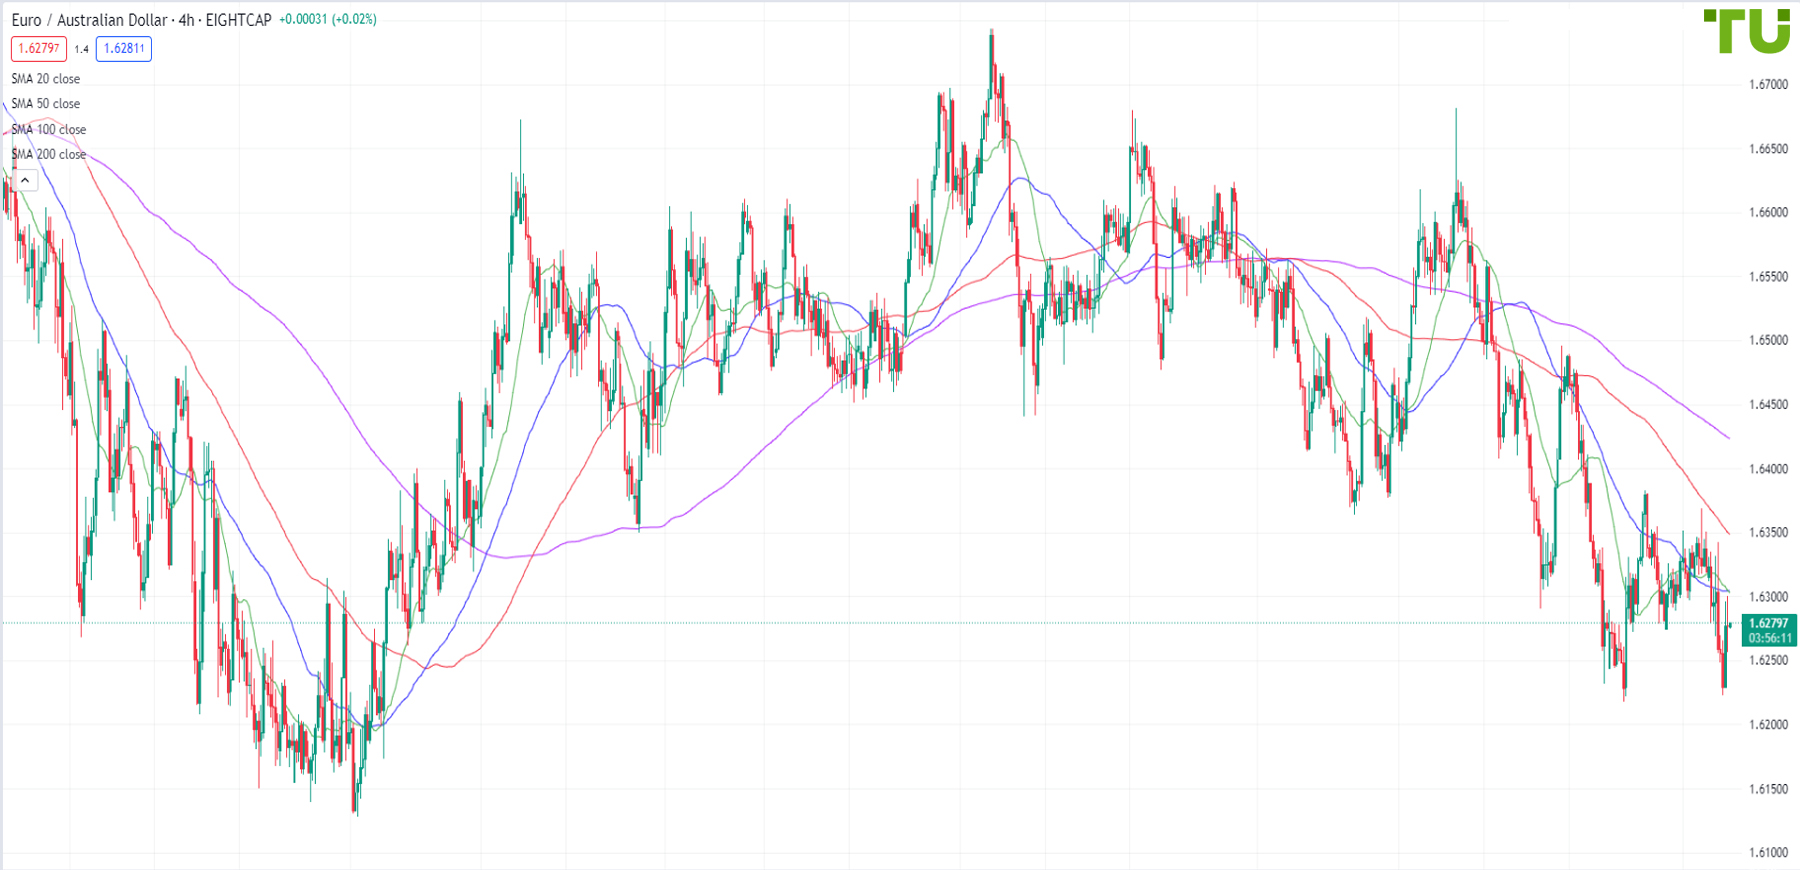 EUR/AUD tested strong support, risks of breakout increase